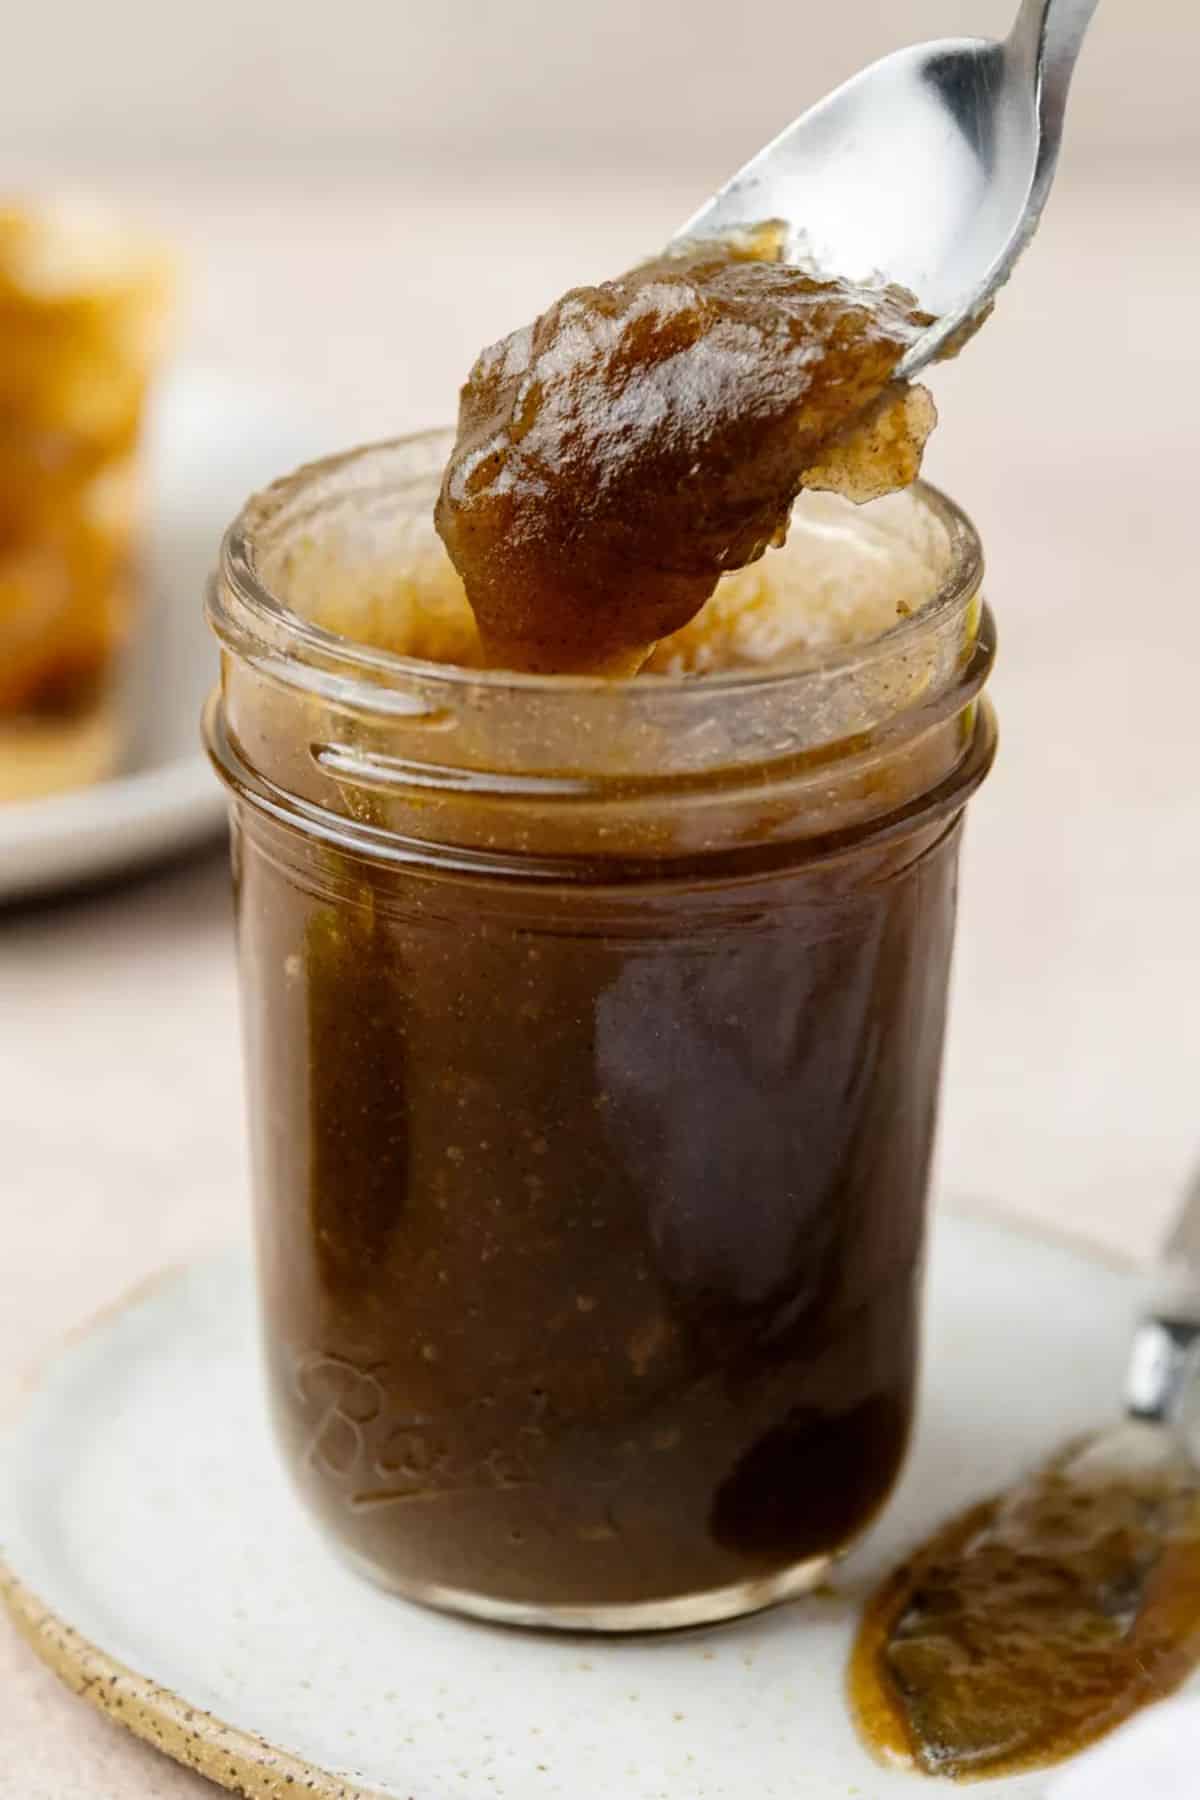 Delicious apple butter in a glass jar.